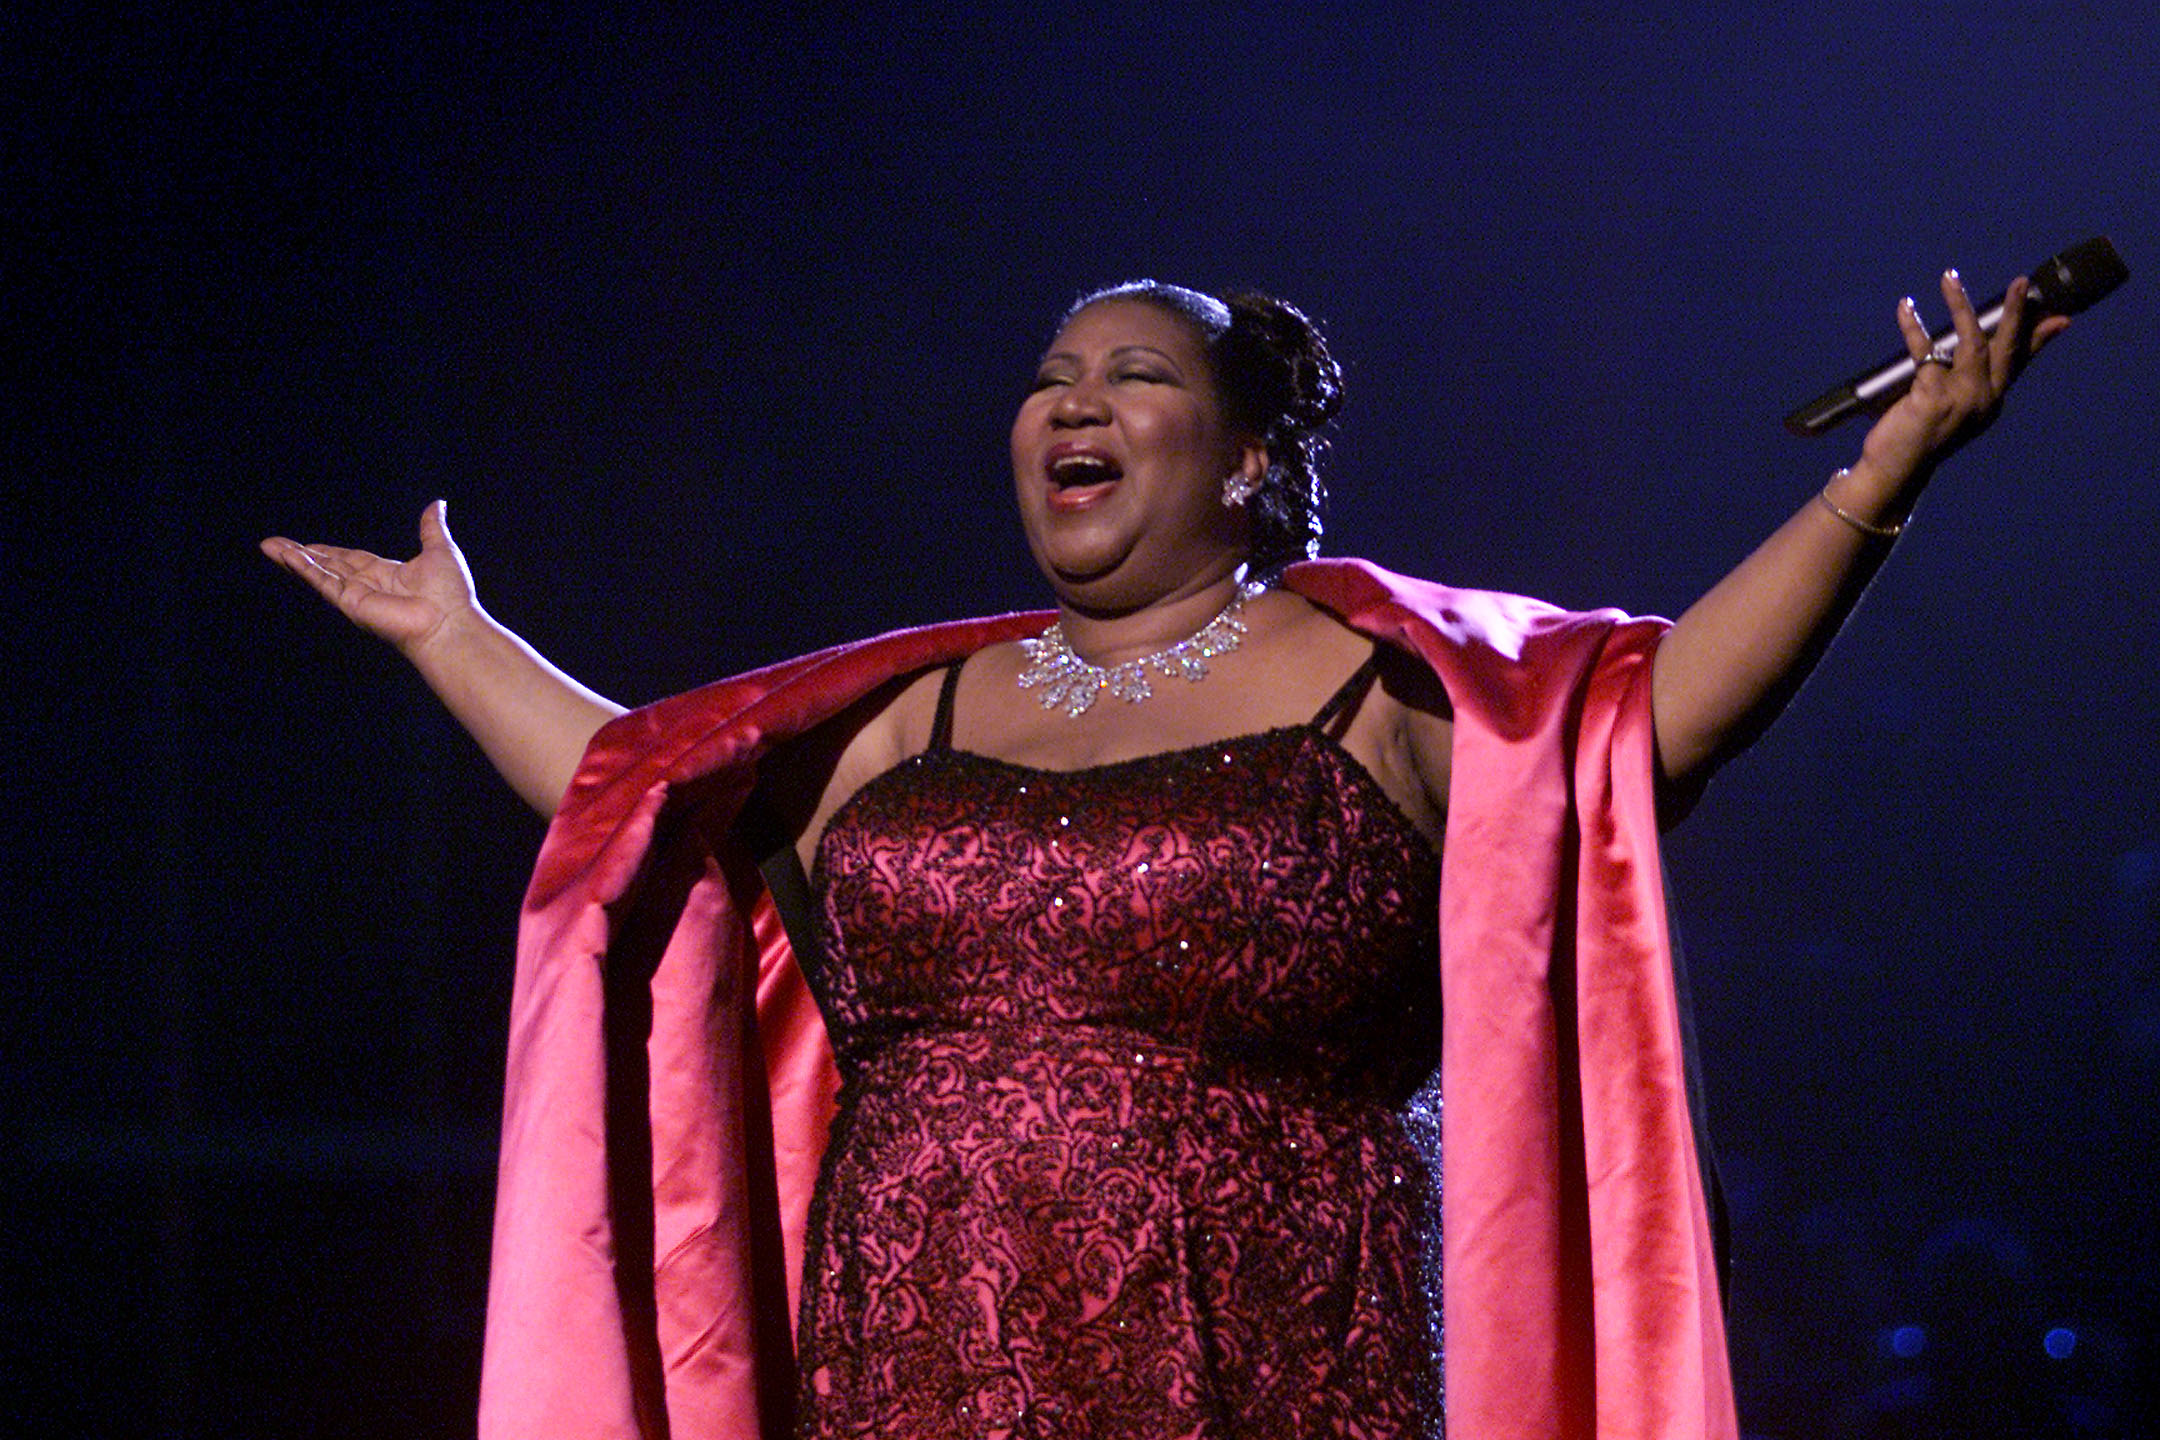 Aretha Franklin at Radio City Music Hall in New York City on Tuesday, April 10, 2001. | Source: Getty Images